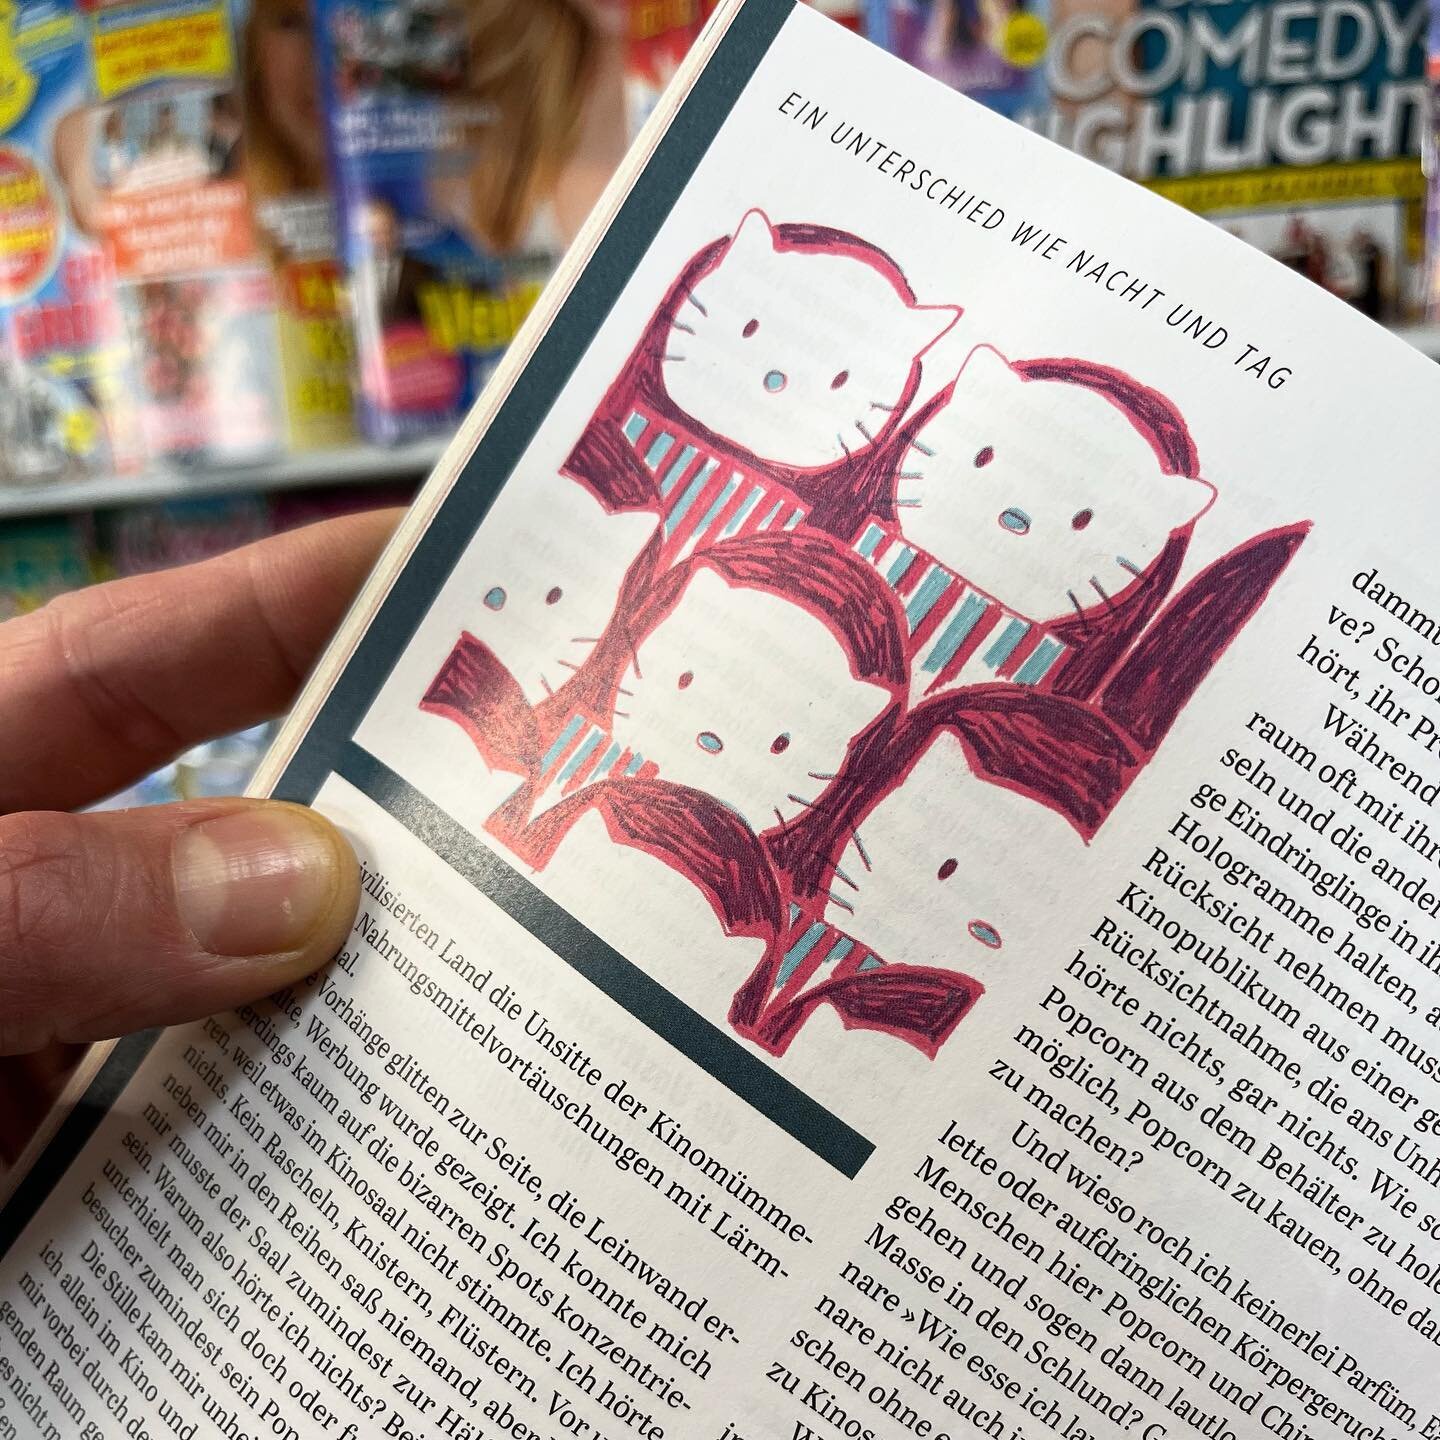 You can find some of my  #illustrations in the latest #dasmagazin - #anselmneft wrote a story about different cinema experiences in different cities. I did the drawings for the text. #editorialillustration #pencilillustration #magazinillustration #il